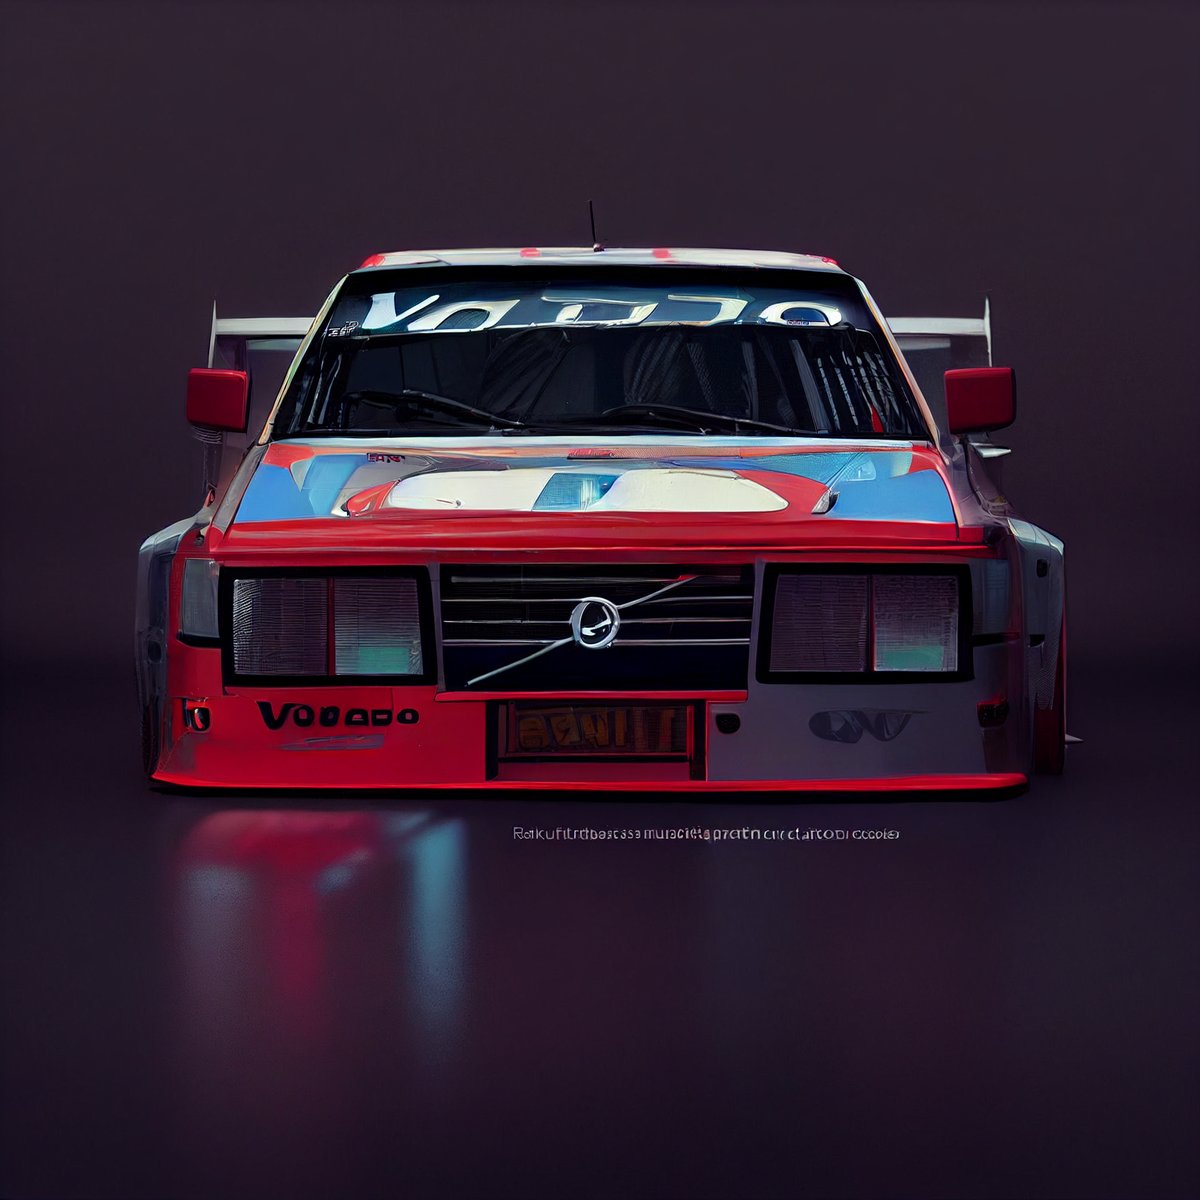 What if…Volvo was known for race cars, not safe cars?